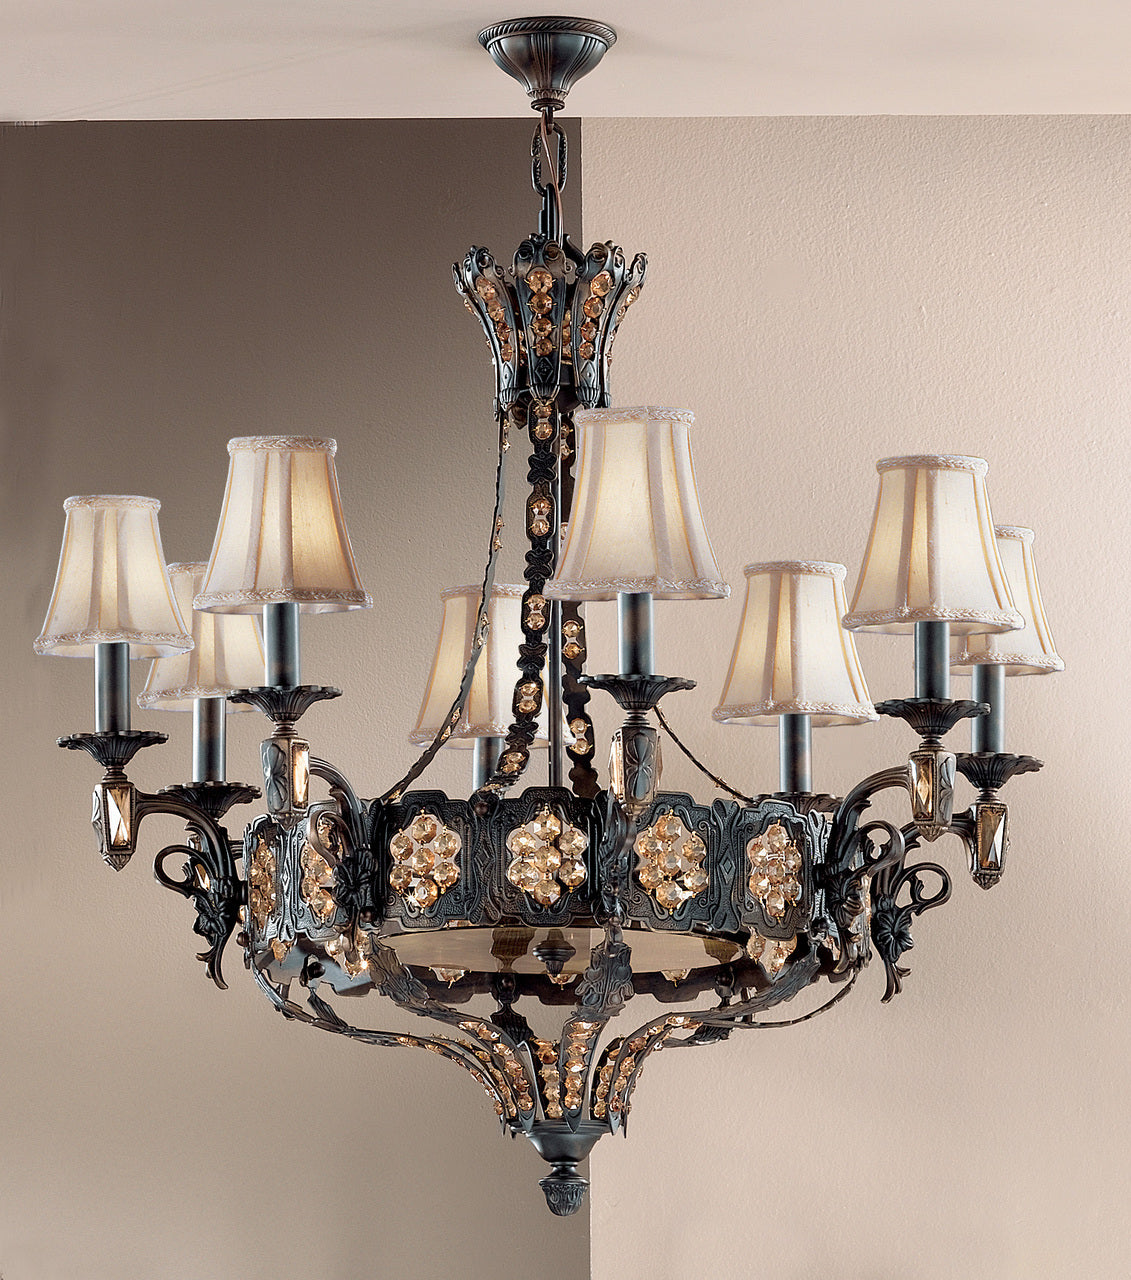 Classic Lighting 57338 AGB AI Castillio de Bronce Cast Brass Chandelier in Aged Bronze (Imported from Spain)